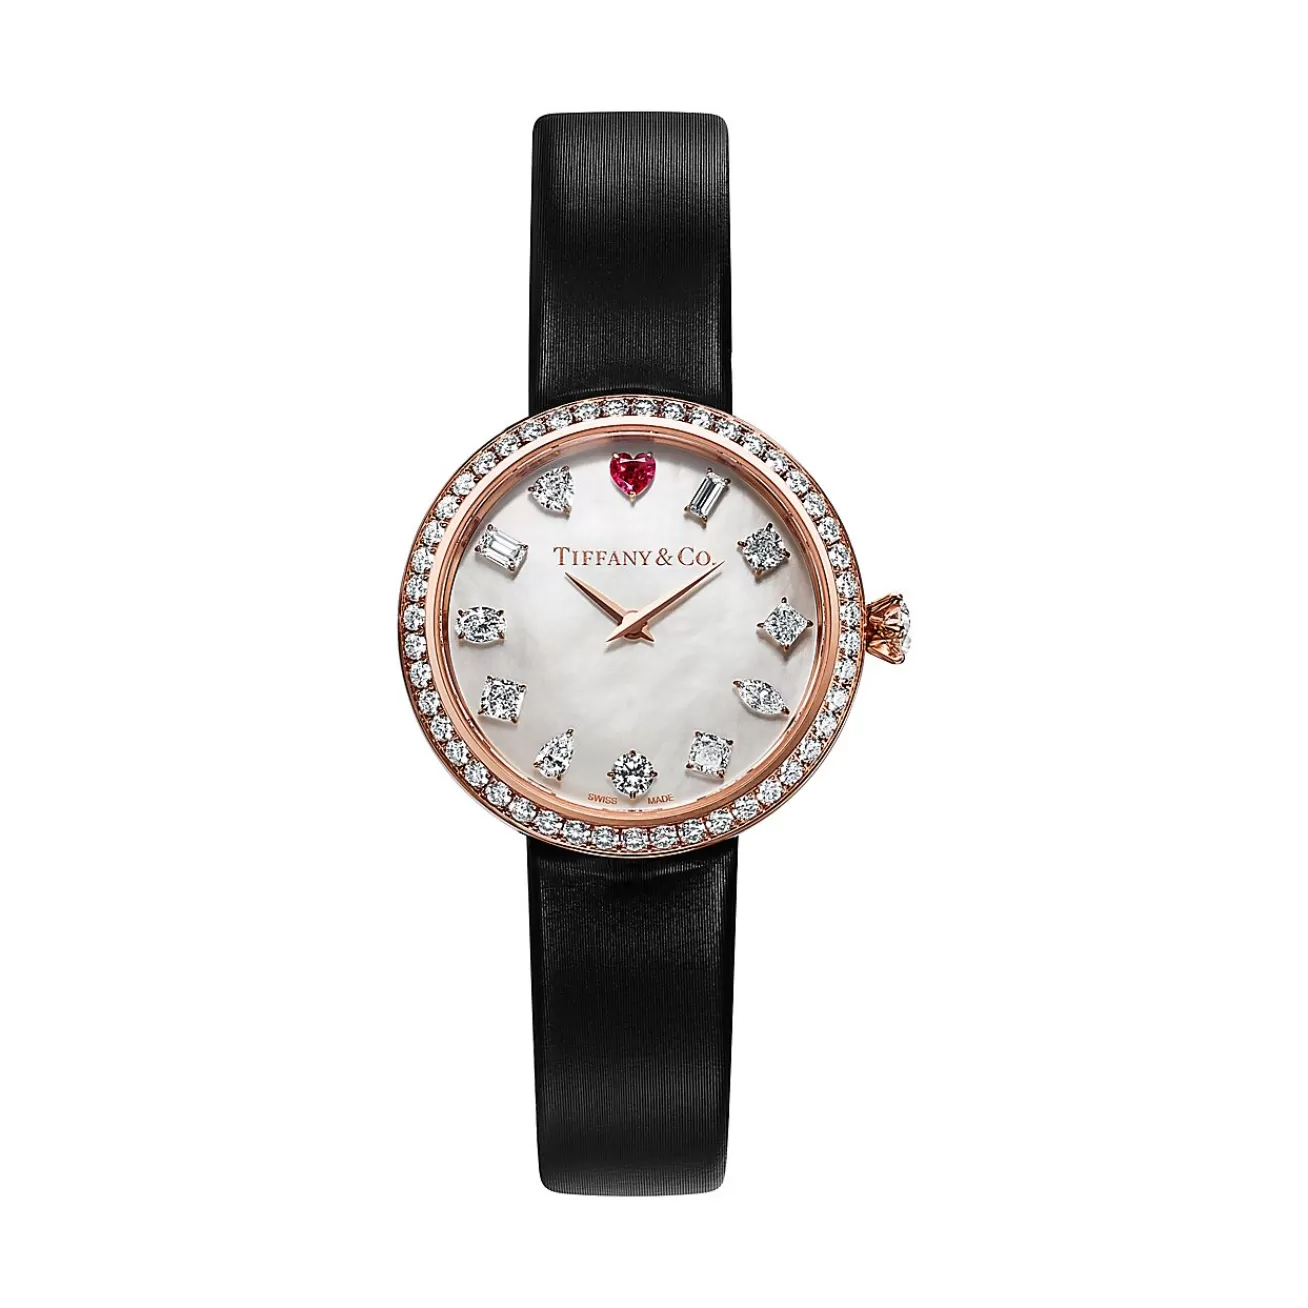 Tiffany & Co. Tiffany Eternity 28 MM Round Watch in Rose Gold with a Rubellite and Diamonds | ^Women Fine Watches | Women’s Watches